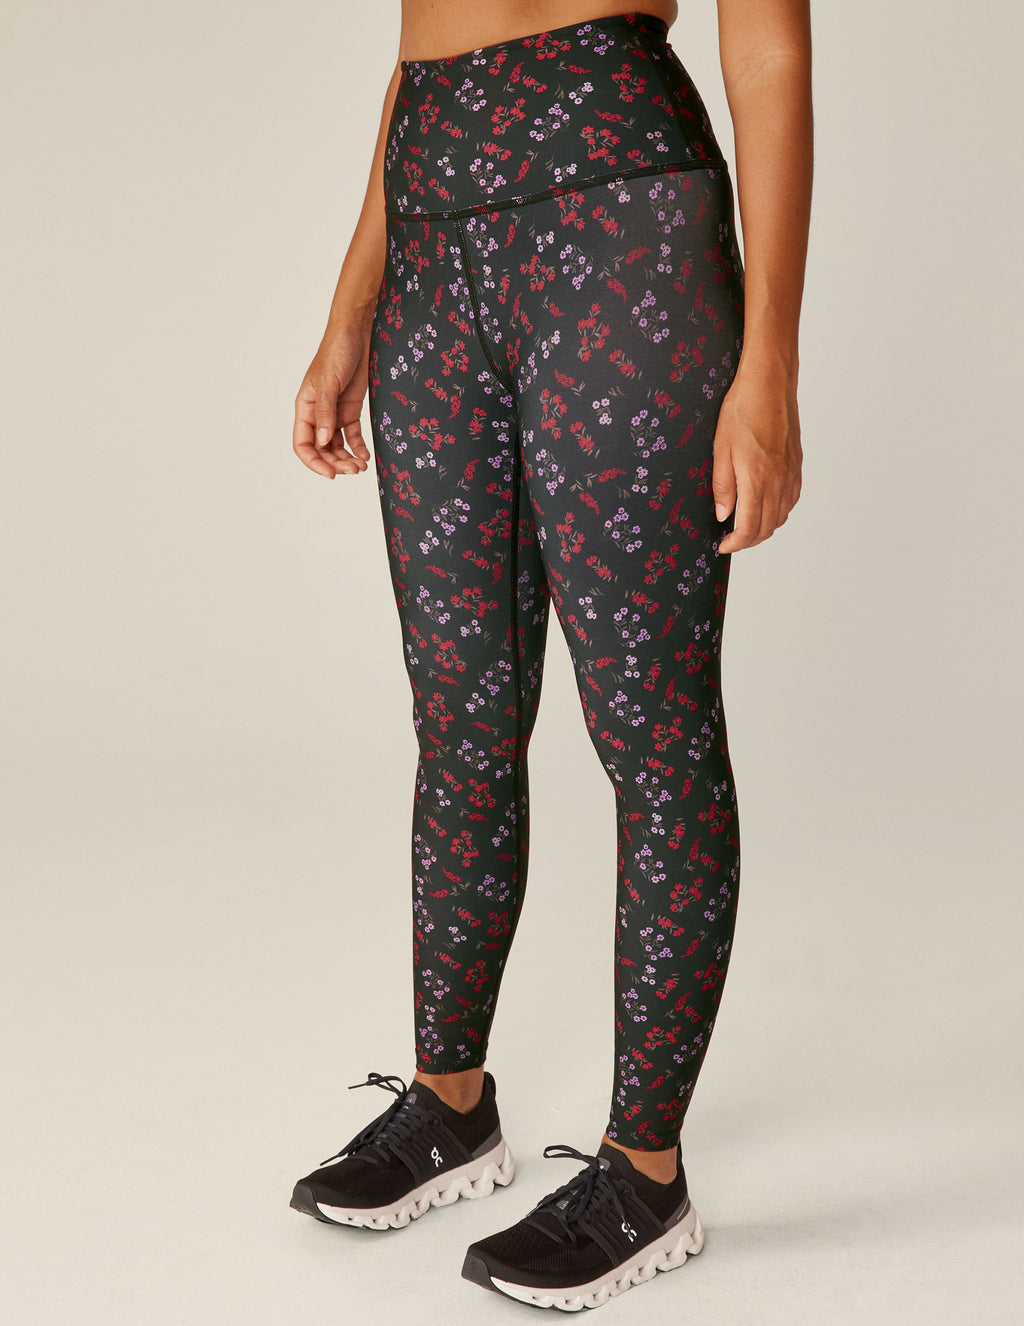 Forget Me Not Floral Endurance Light High Waisted Midi Legging Secondary Image